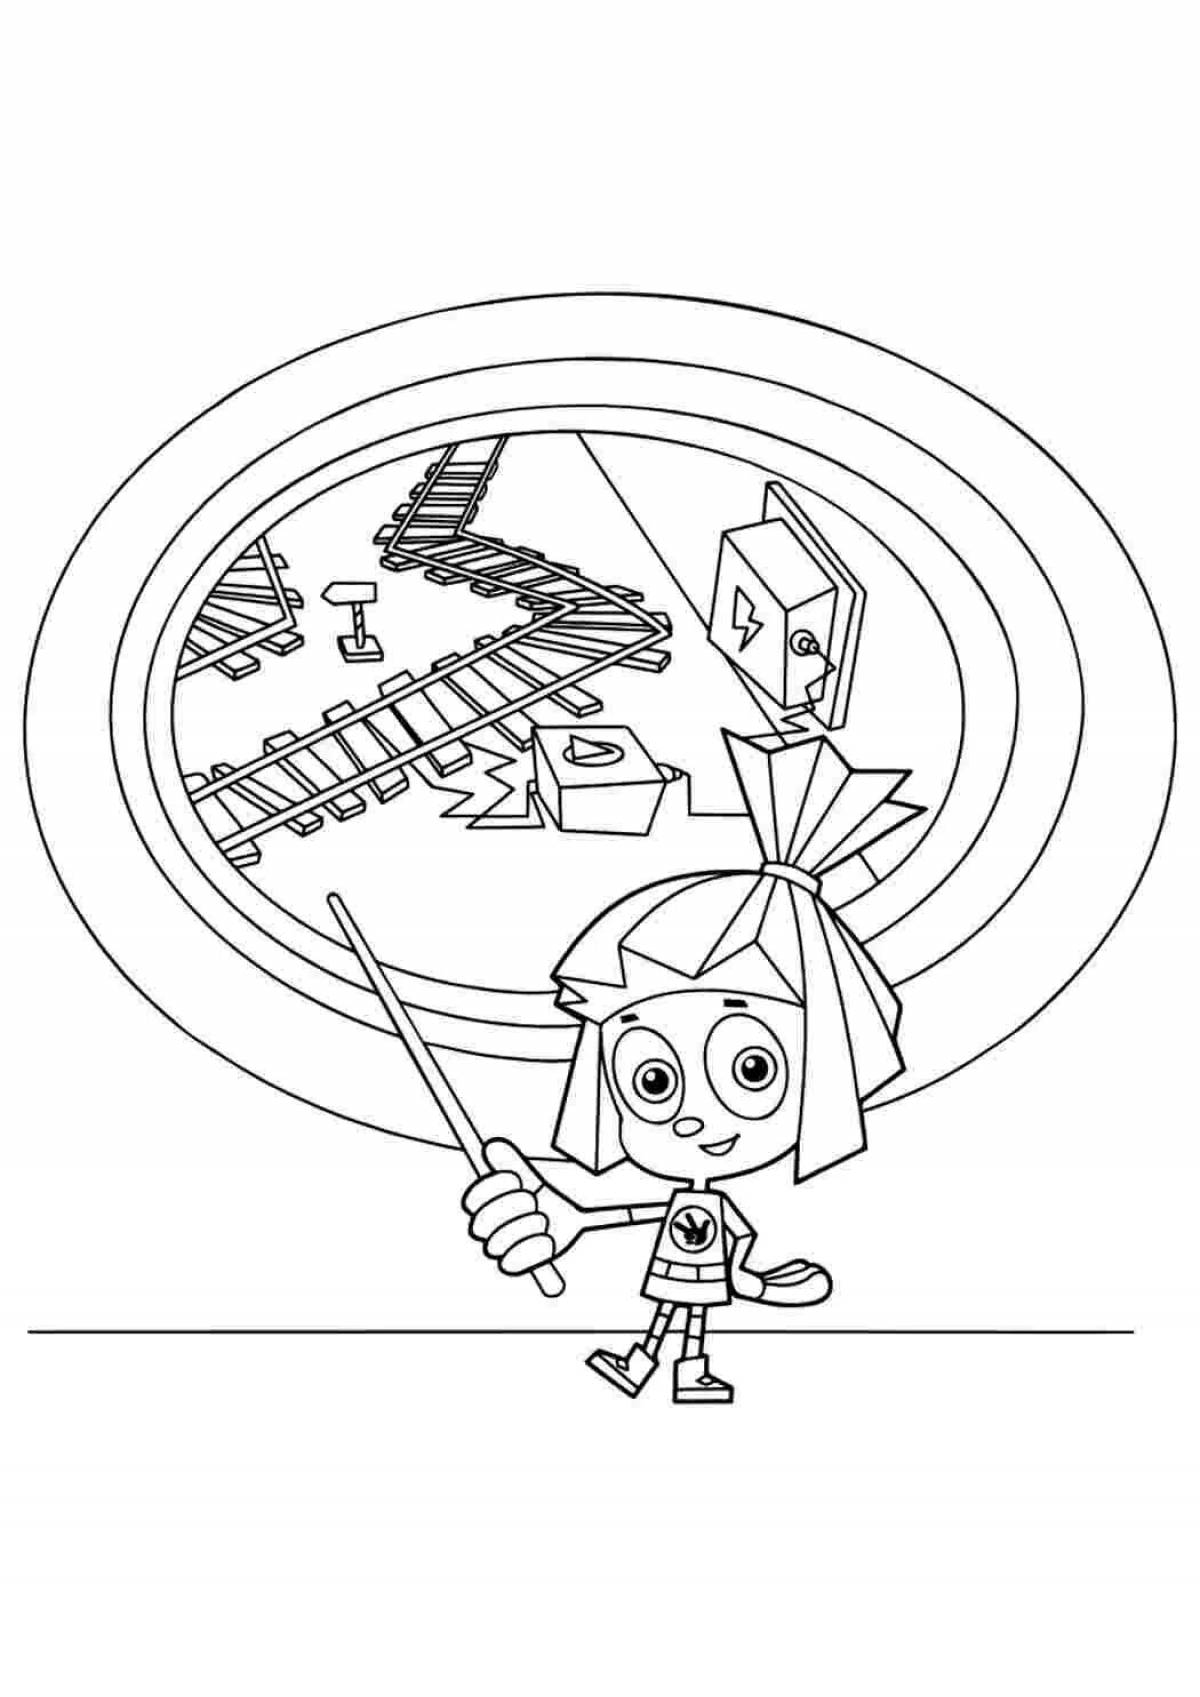 Creative coloring page turn on